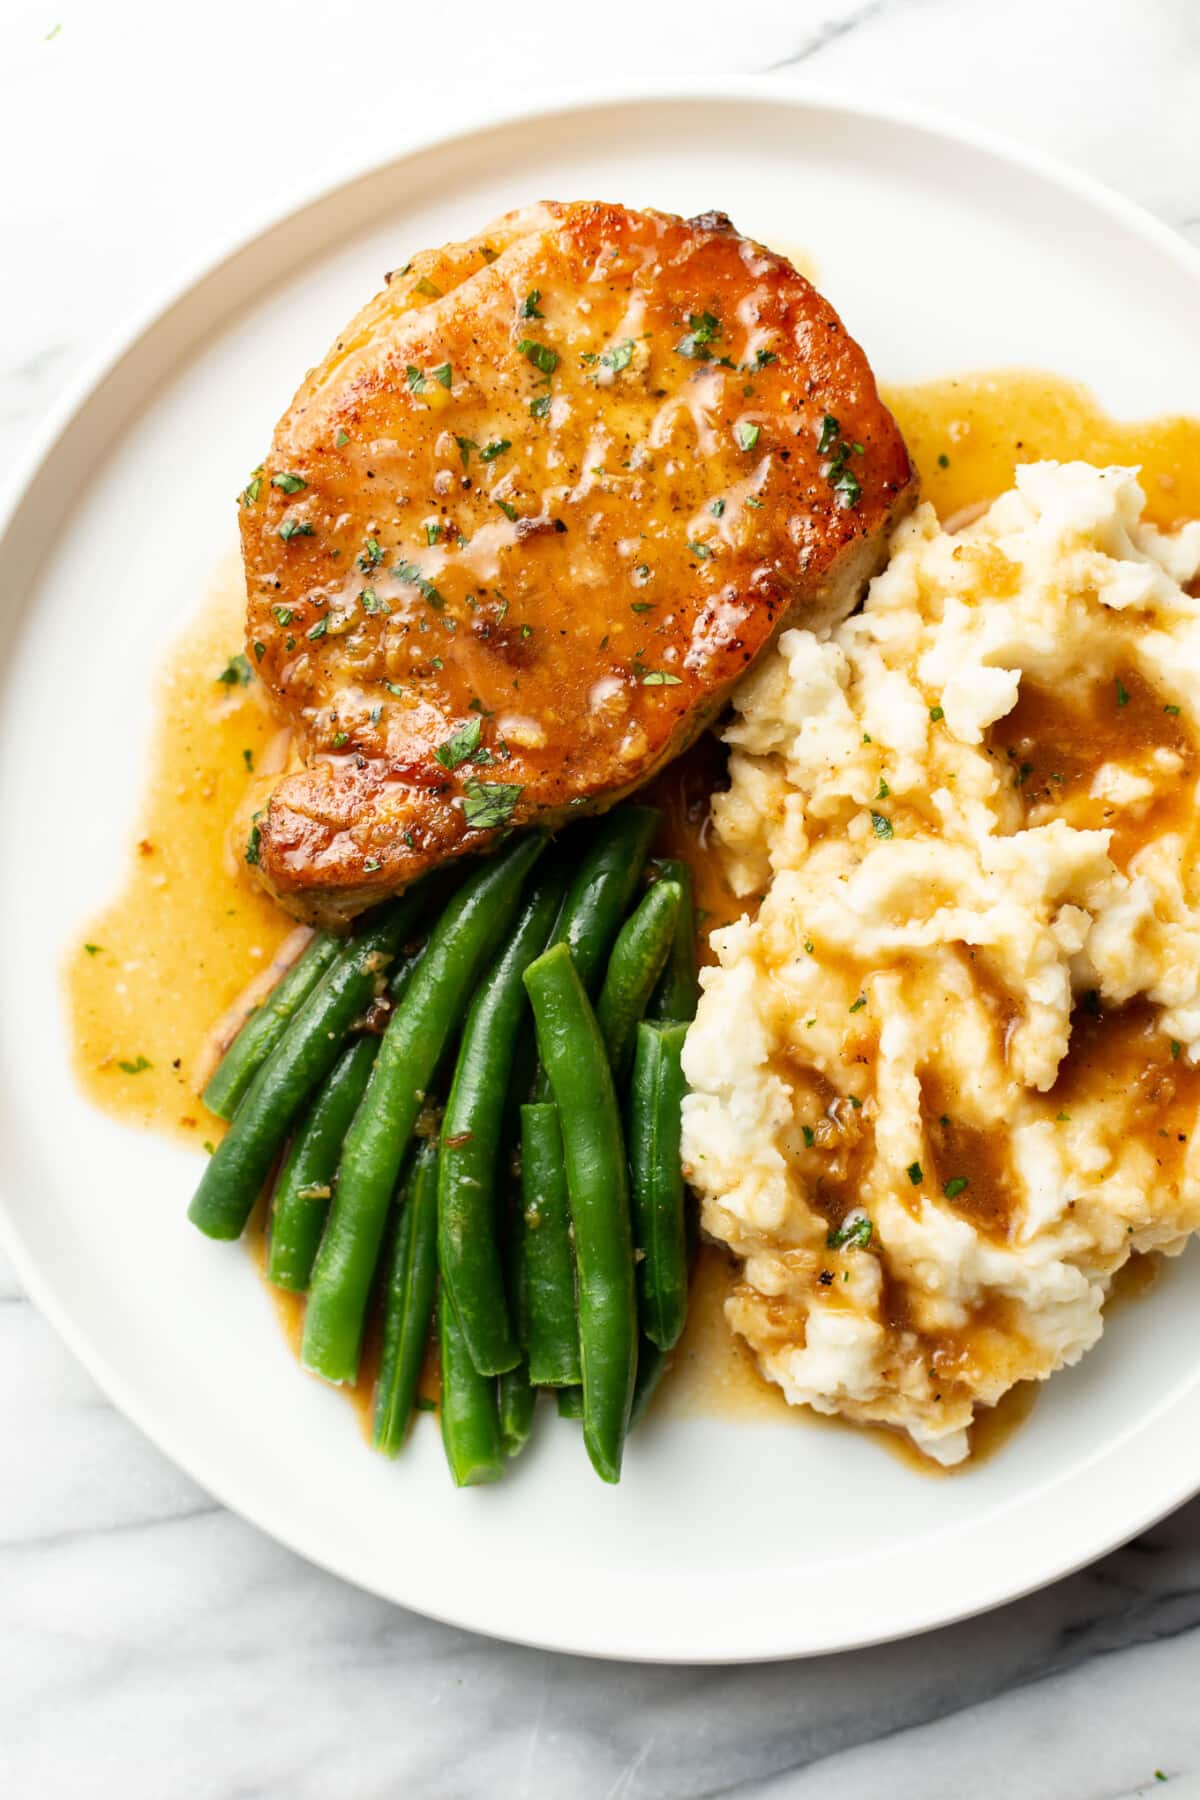 a plate with a pork chop, green beans, mashed potatoes, and honey garlic sauce